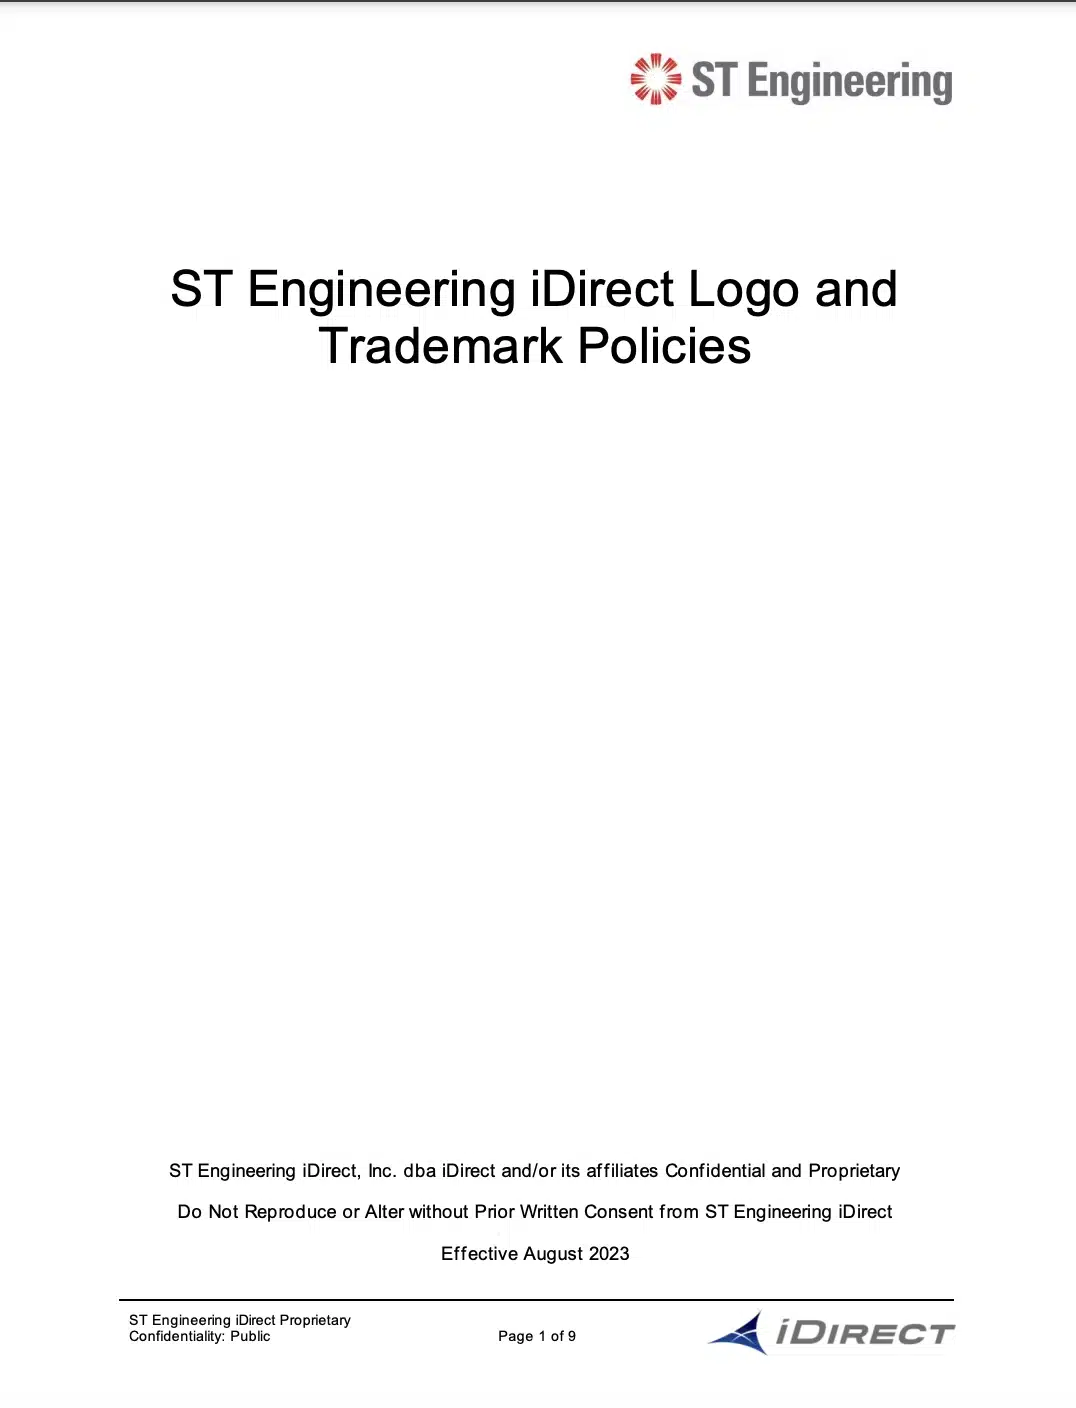 ST Engineering iDirect Logo and Trademark Guidelines